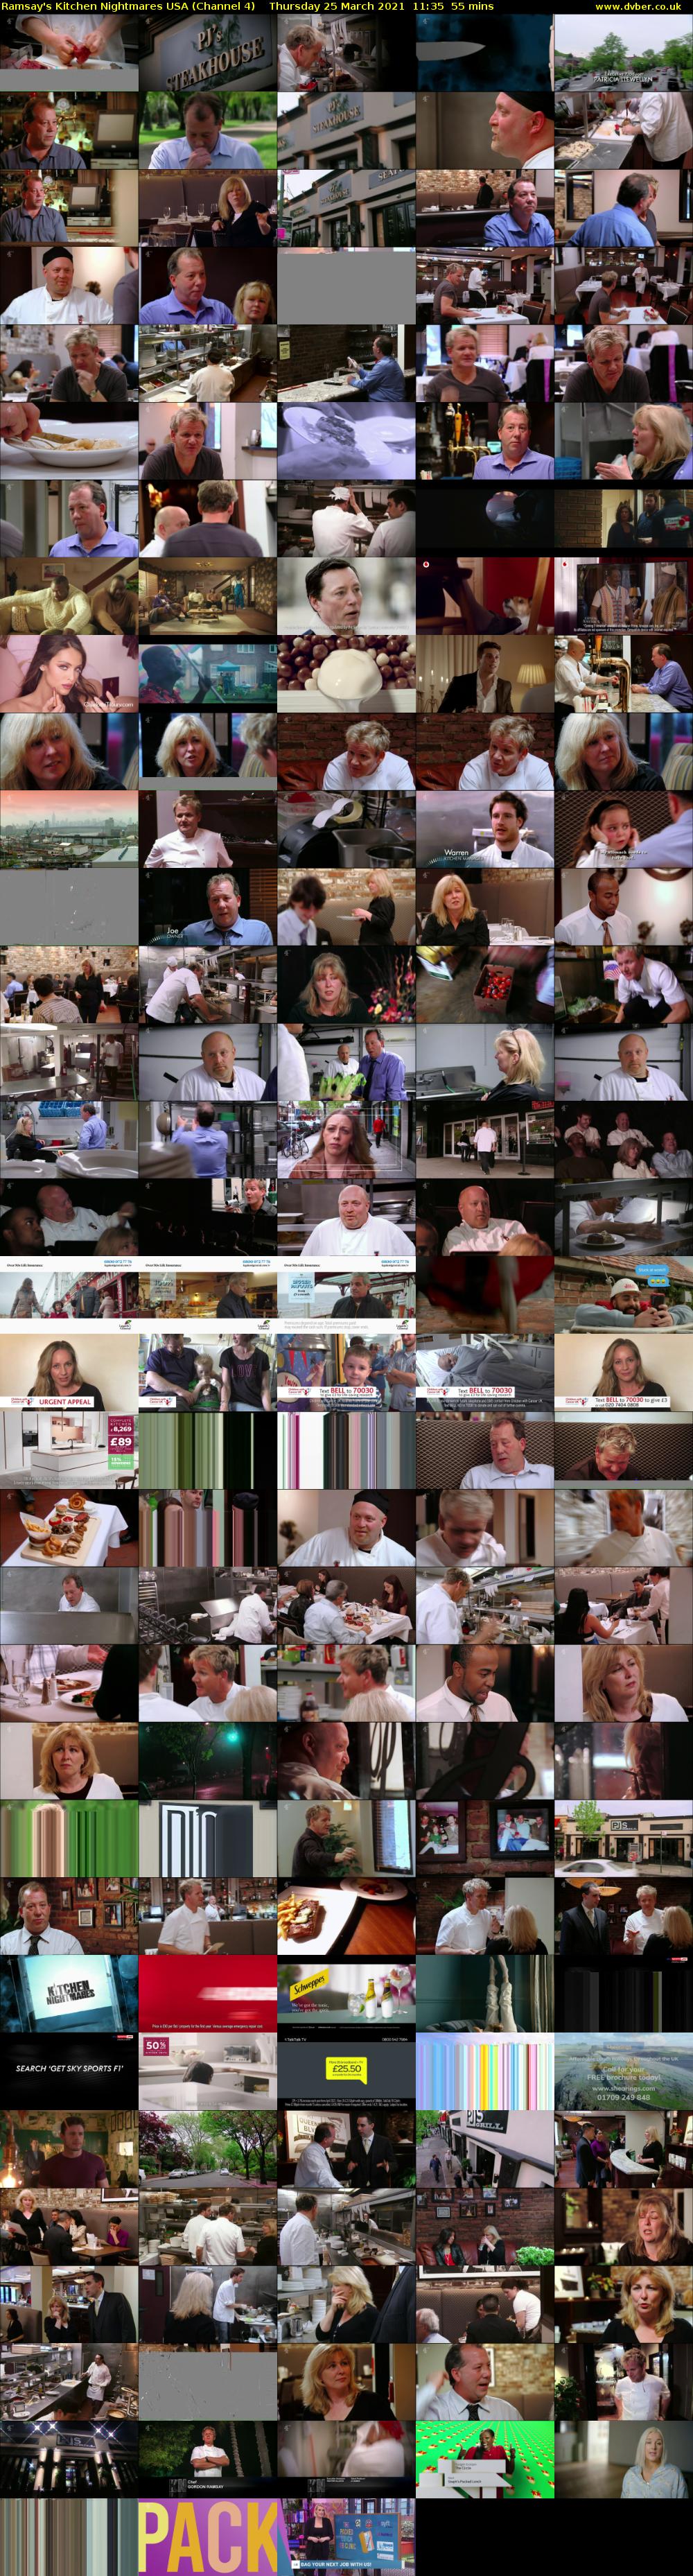 Ramsay's Kitchen Nightmares USA (Channel 4) Thursday 25 March 2021 11:35 - 12:30